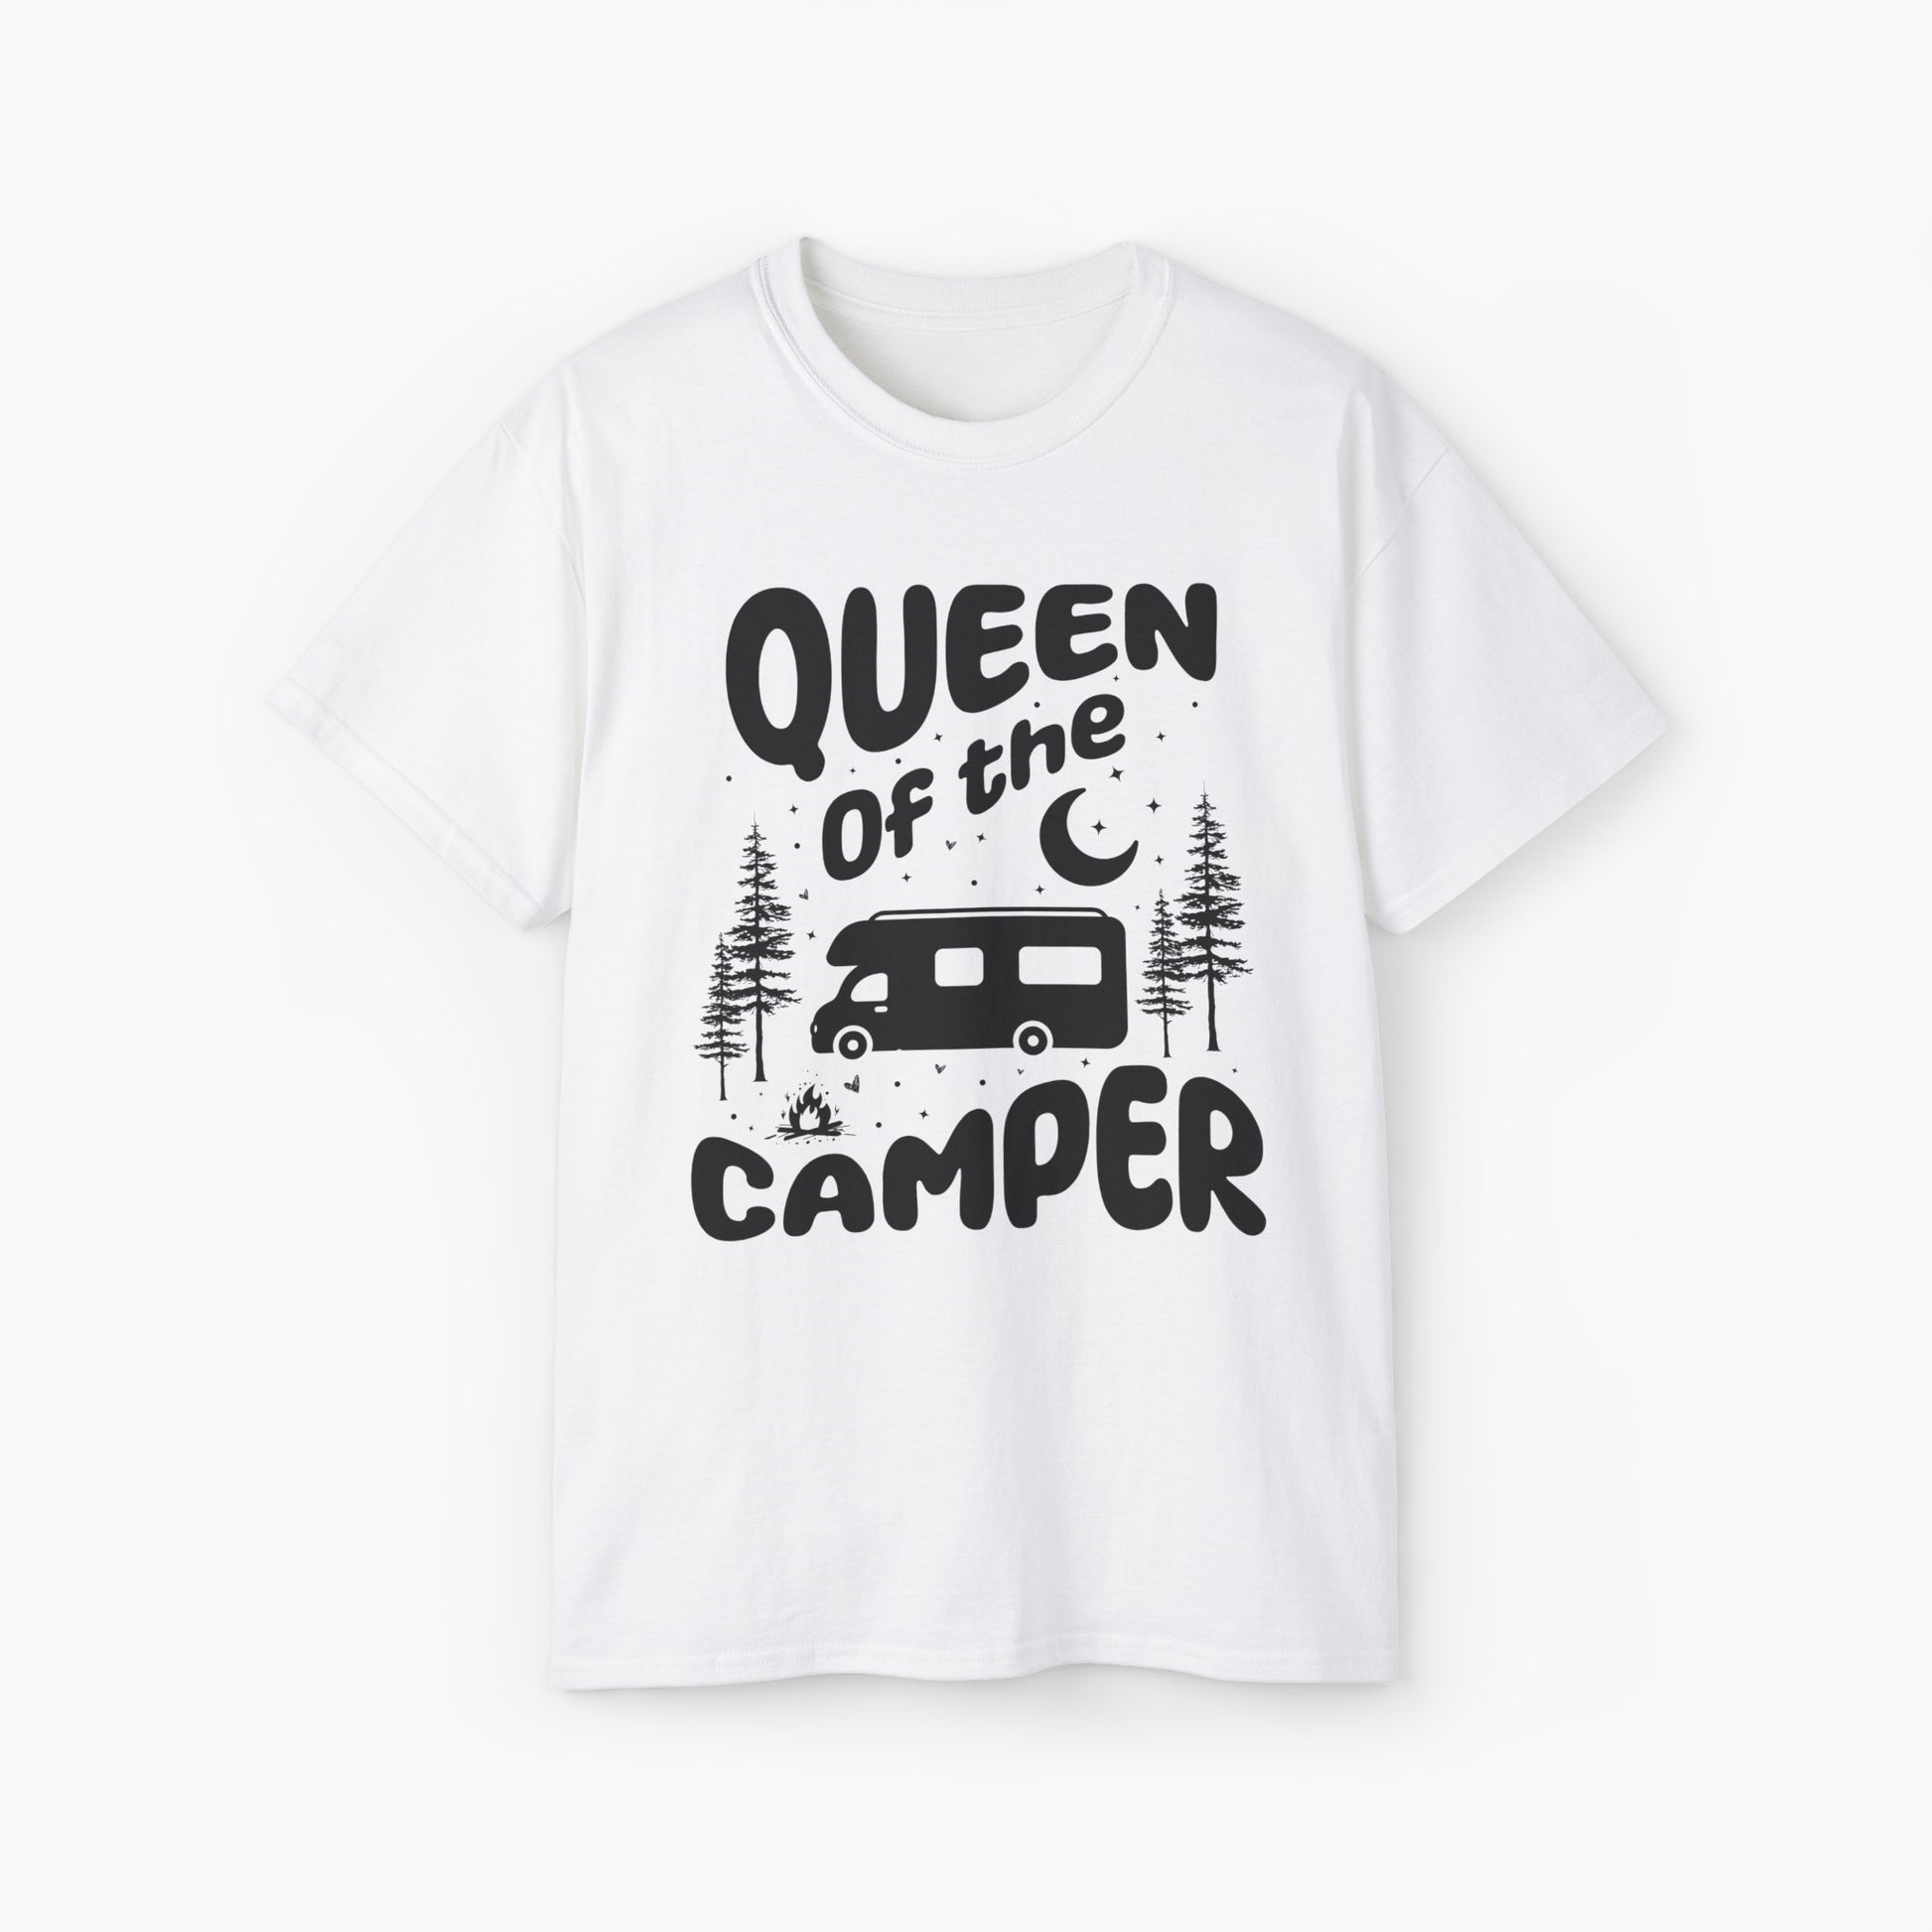 White t-shirt with 'Camping Queen' text, illustrated with a camping van, stars, trees, campfire, and moon, on a plain background.